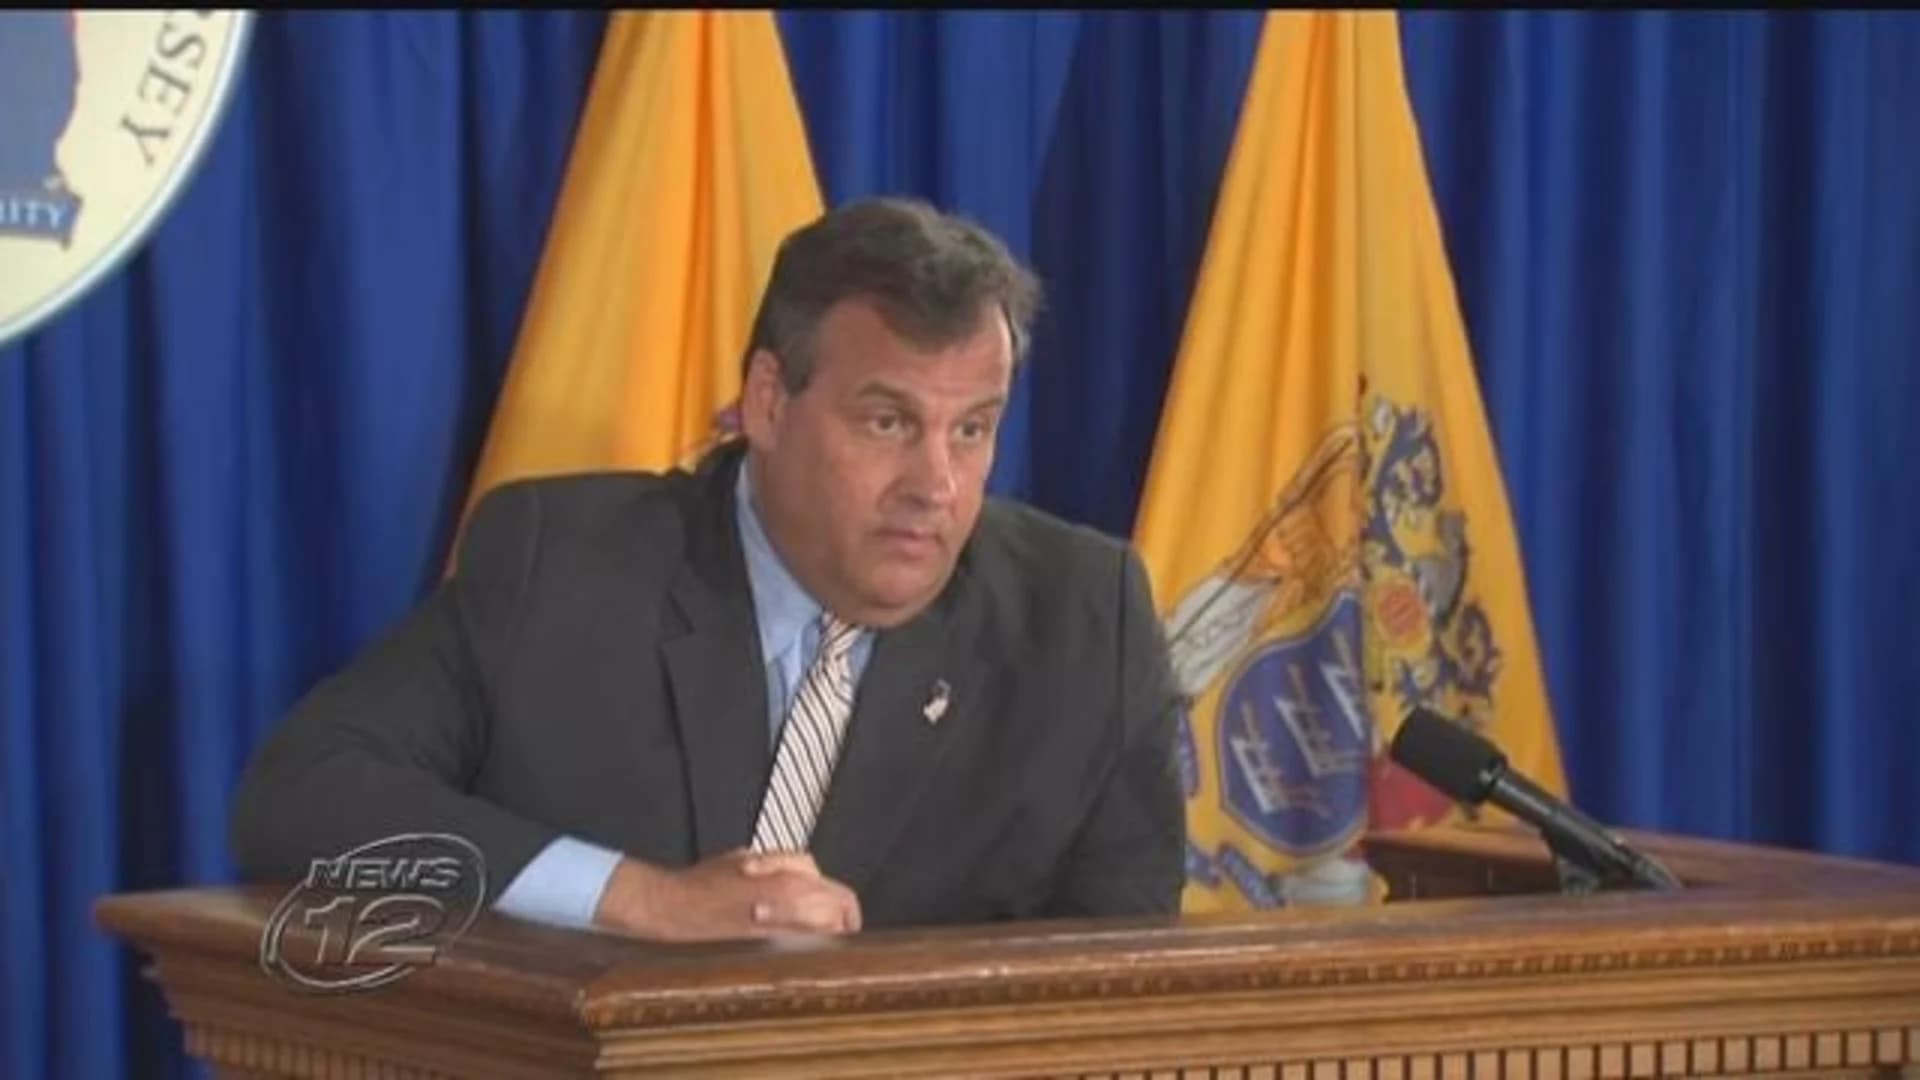 New poll puts Christie’s approval rating at 16 percent